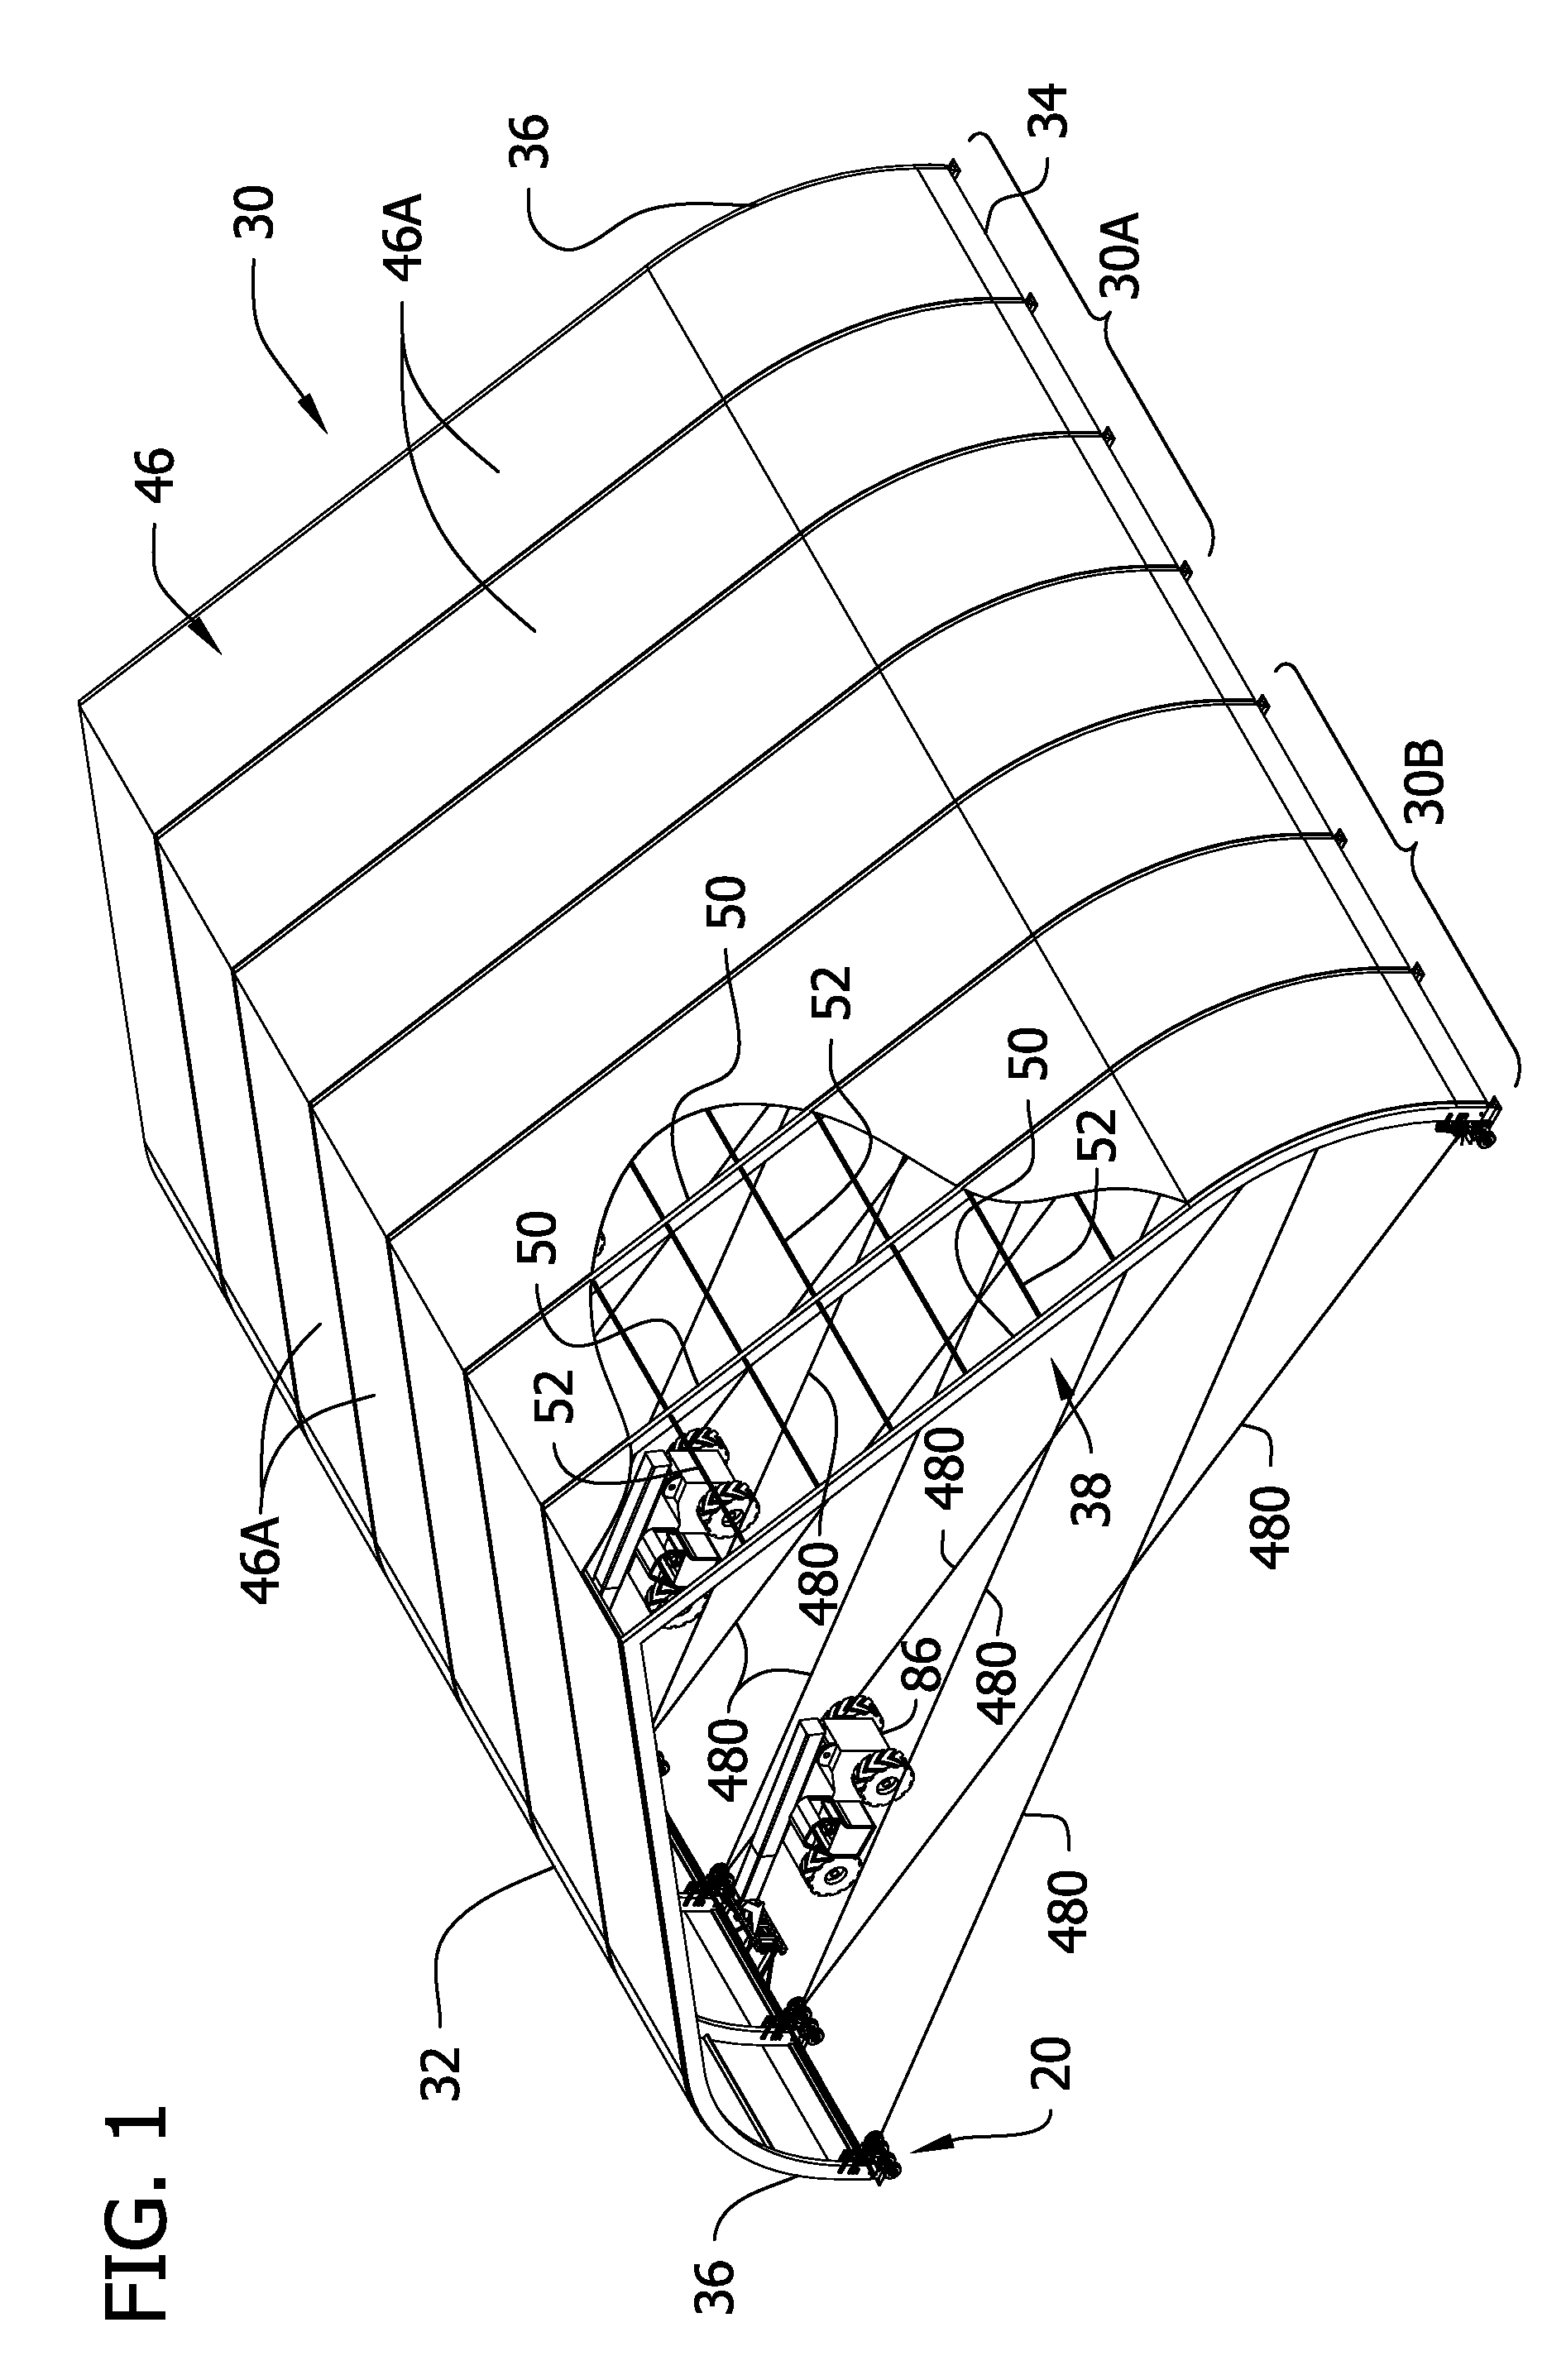 Method of remediating a contaminated waste site